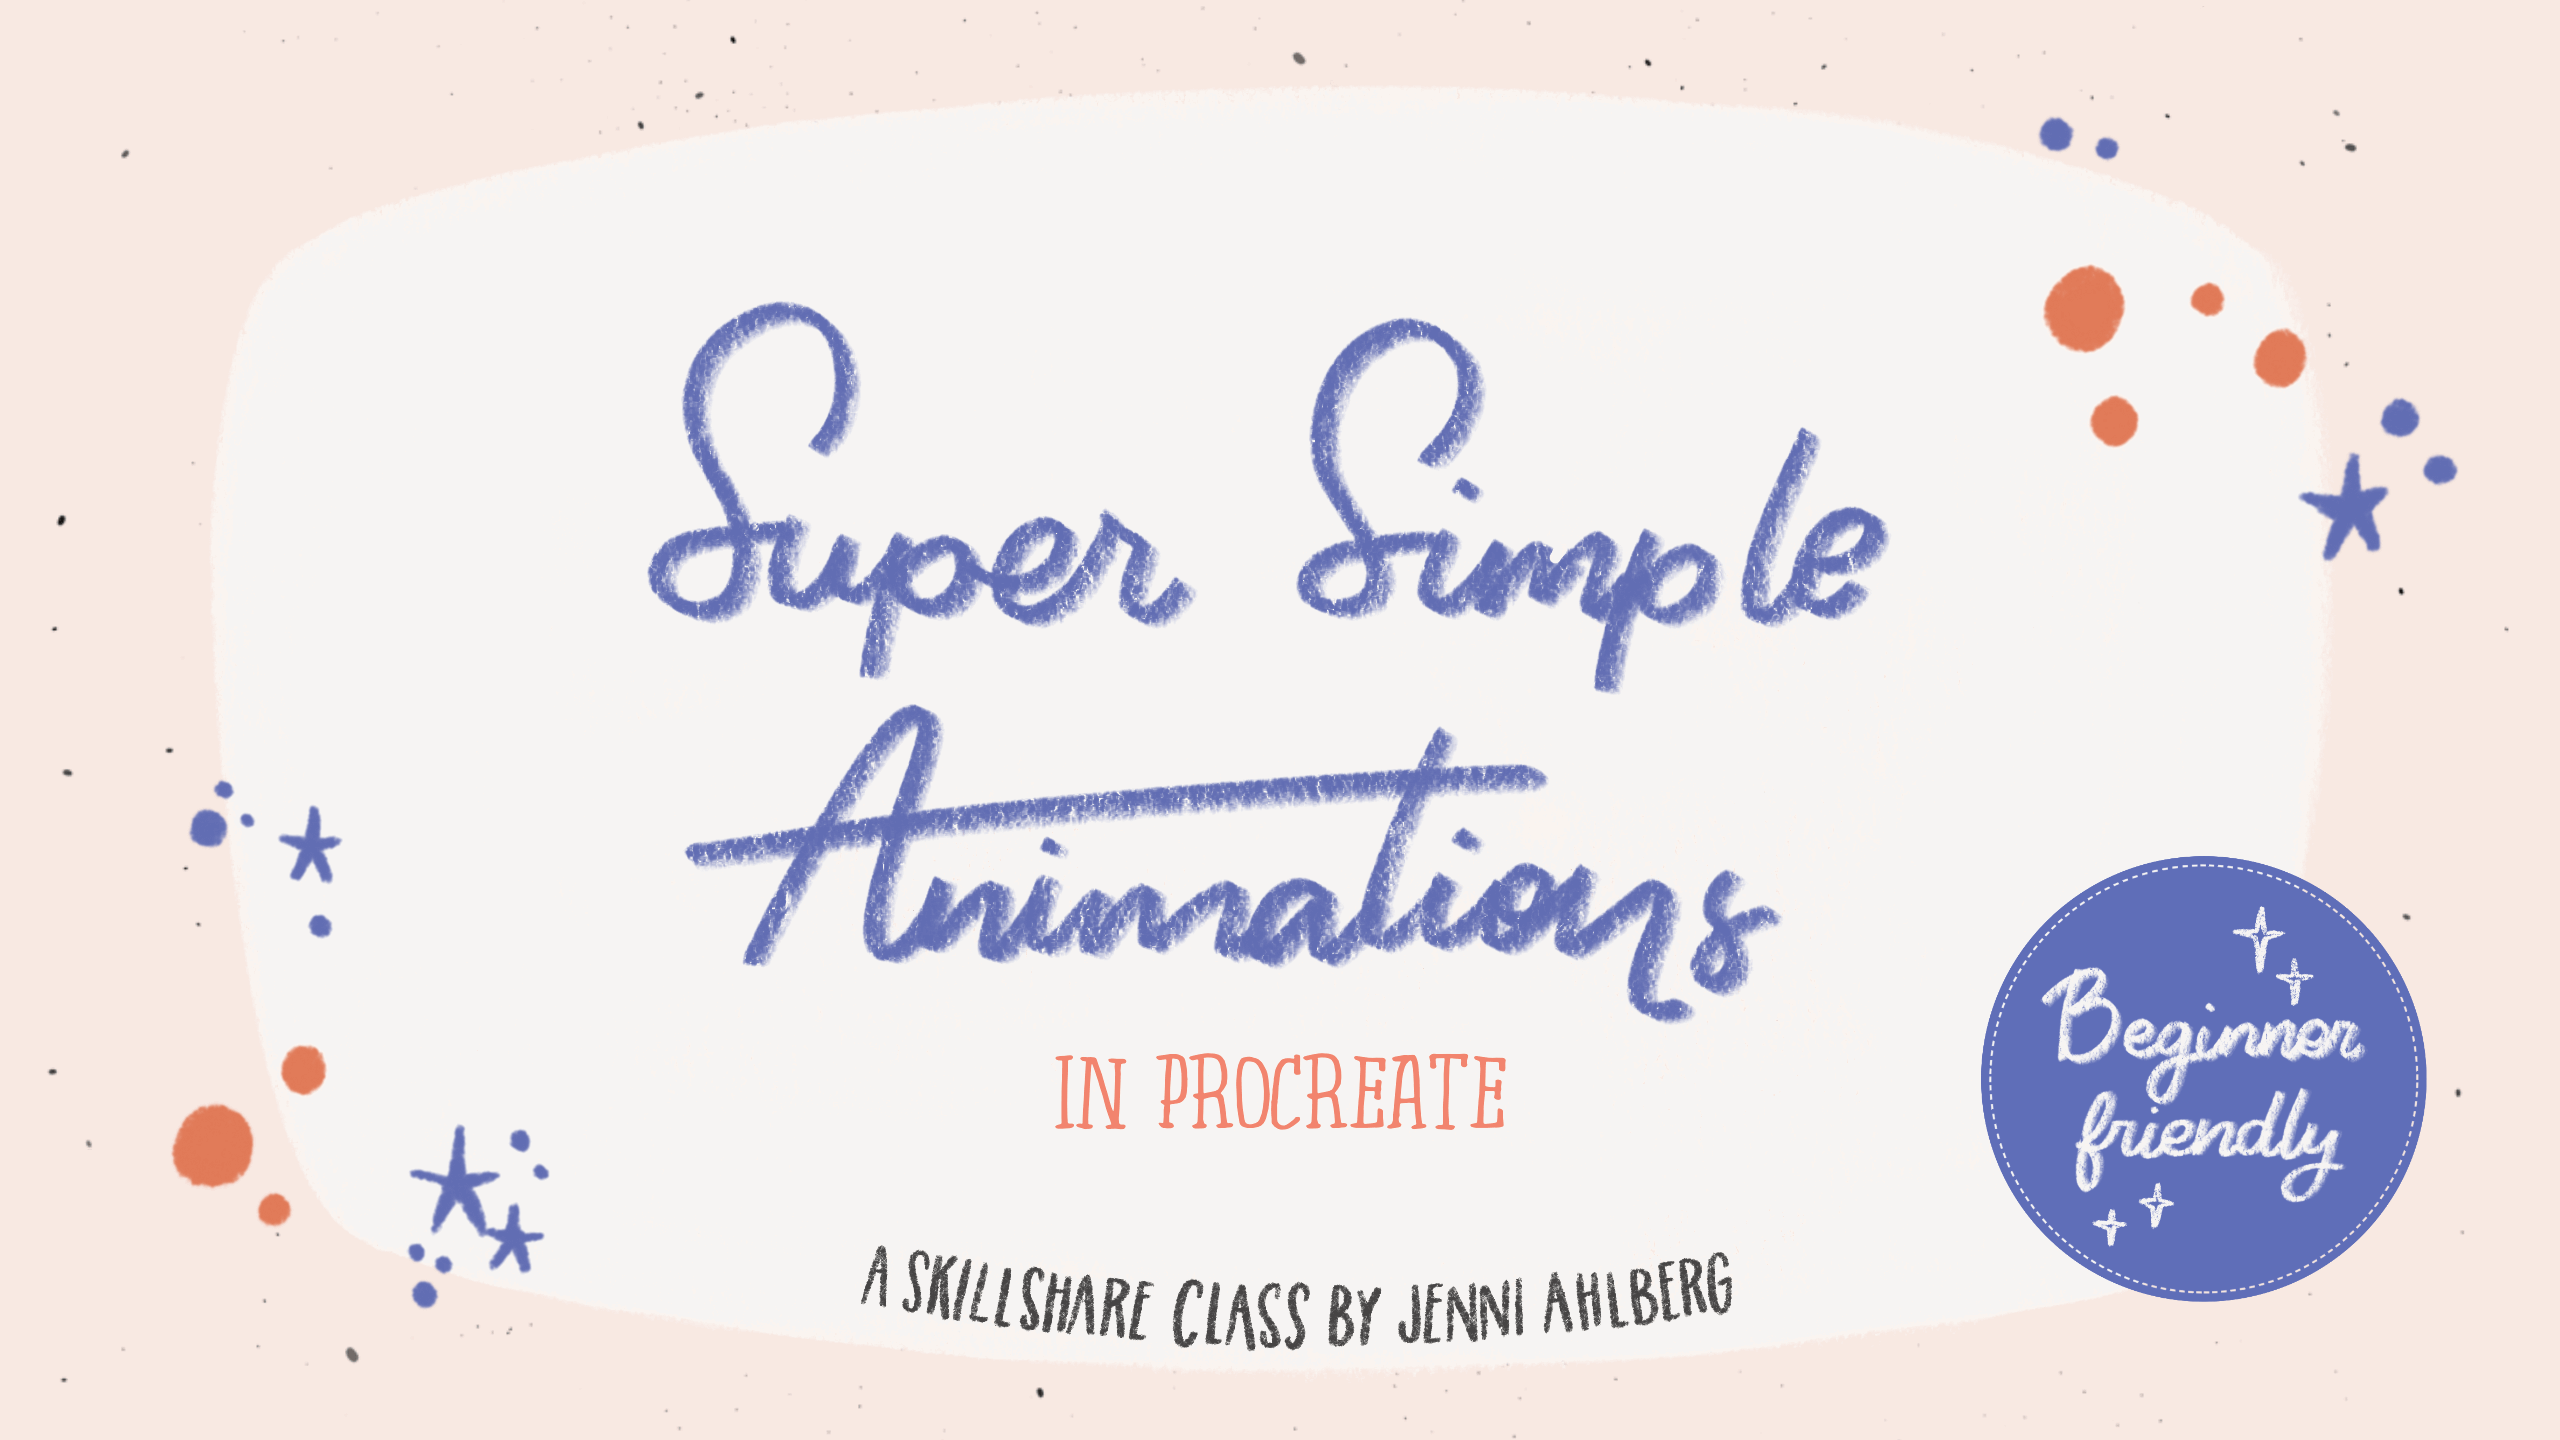 Animated blue text that says 'Super simple animations in Procreate' on a white and pink background with small moving motifs